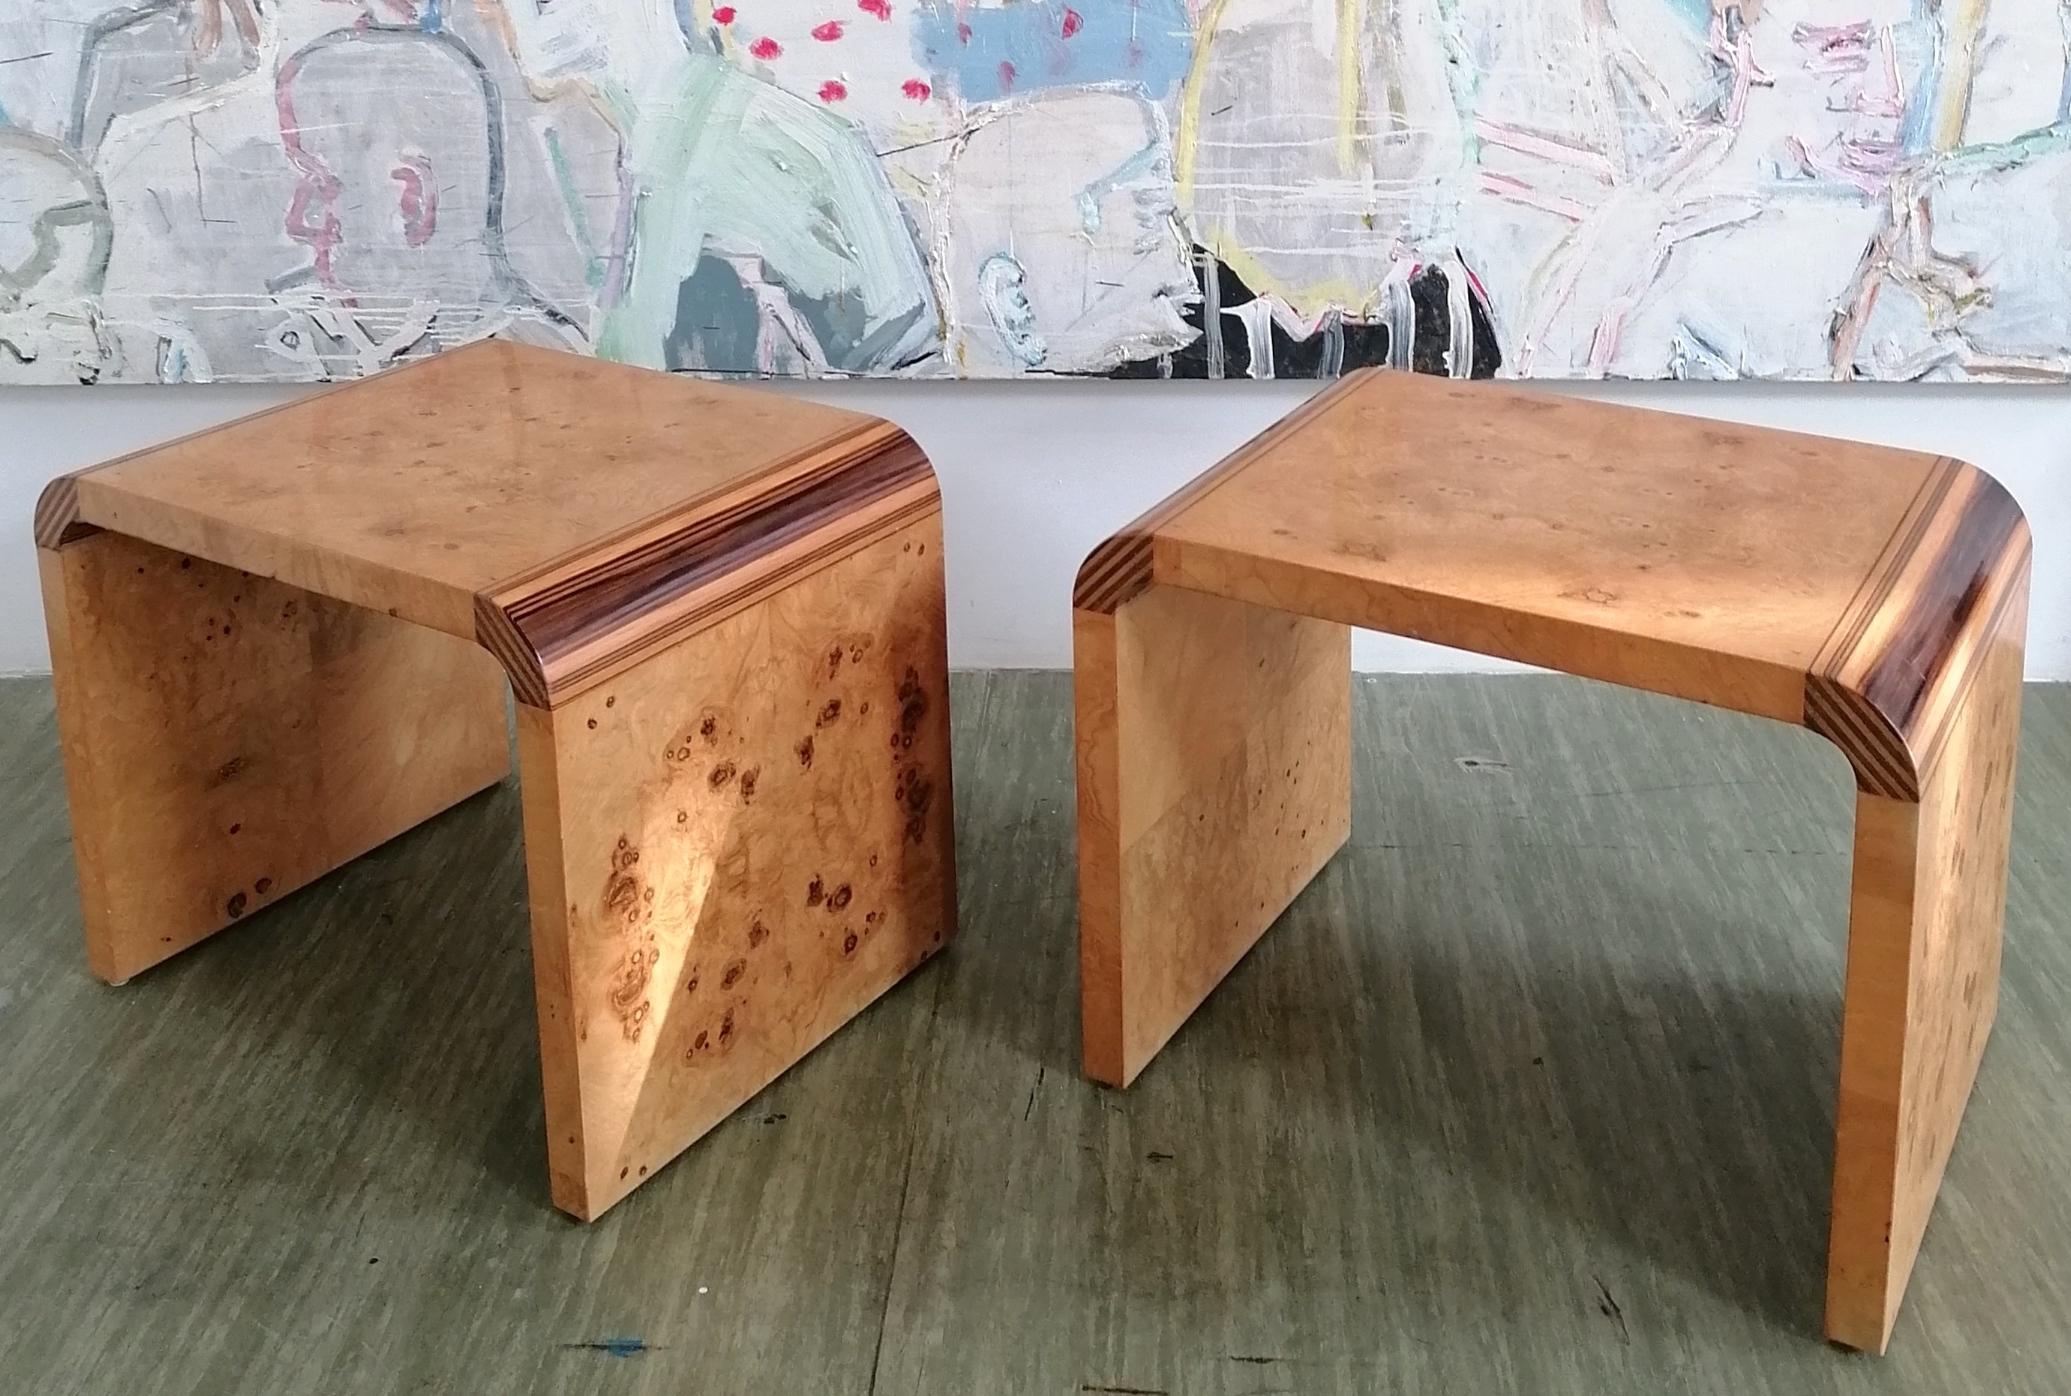 A rare pair of 1970s American waterfall side tables, from Henredon Furniture's high-end 'Scene Two' range. Book-matched burr olive wood, with unusual striped macassar ebony inlaid corners.
Would also work well as bedside tables, or stools (they're